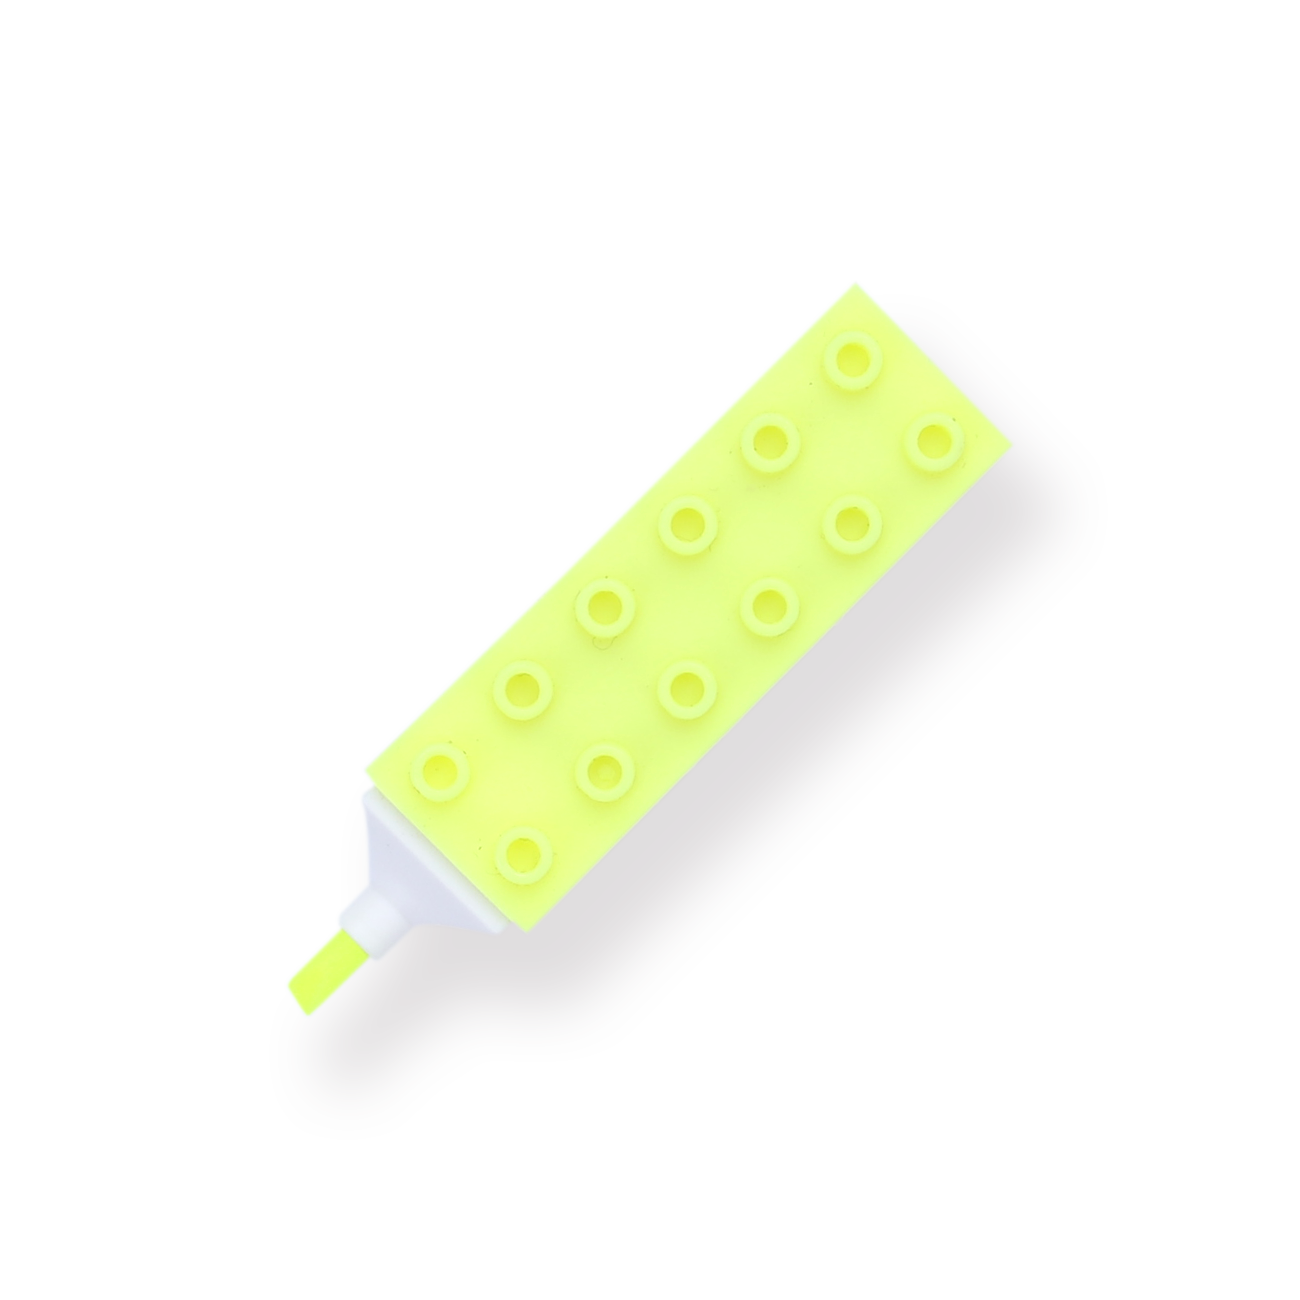 Building Block Highlighter - Yellow - Stationery Pal